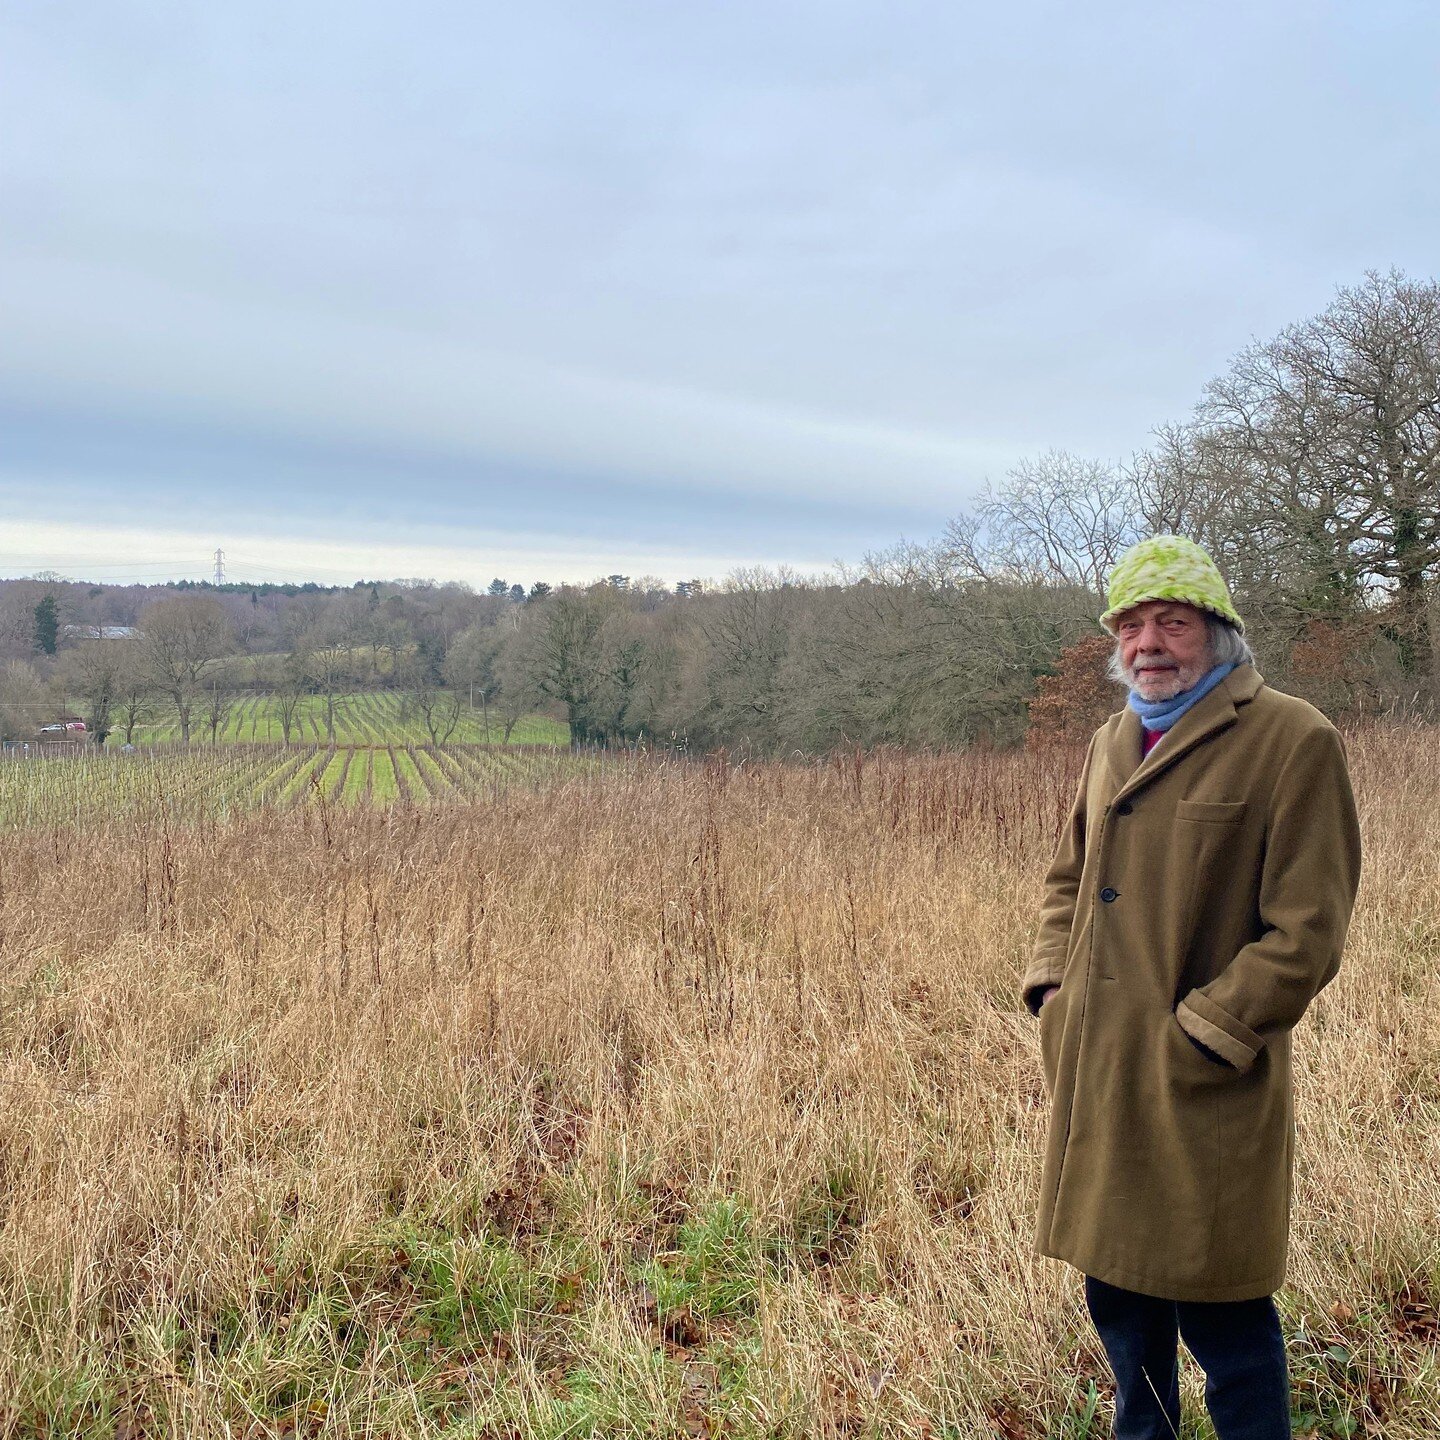 A chilly start in the office this morning getting ready for some exciting 2024 projects at Foxhole Vineyard.

Our founder and owner, Cliff has been selling wine in London for over 50 years. During this career, there are few things he hasn't done in t